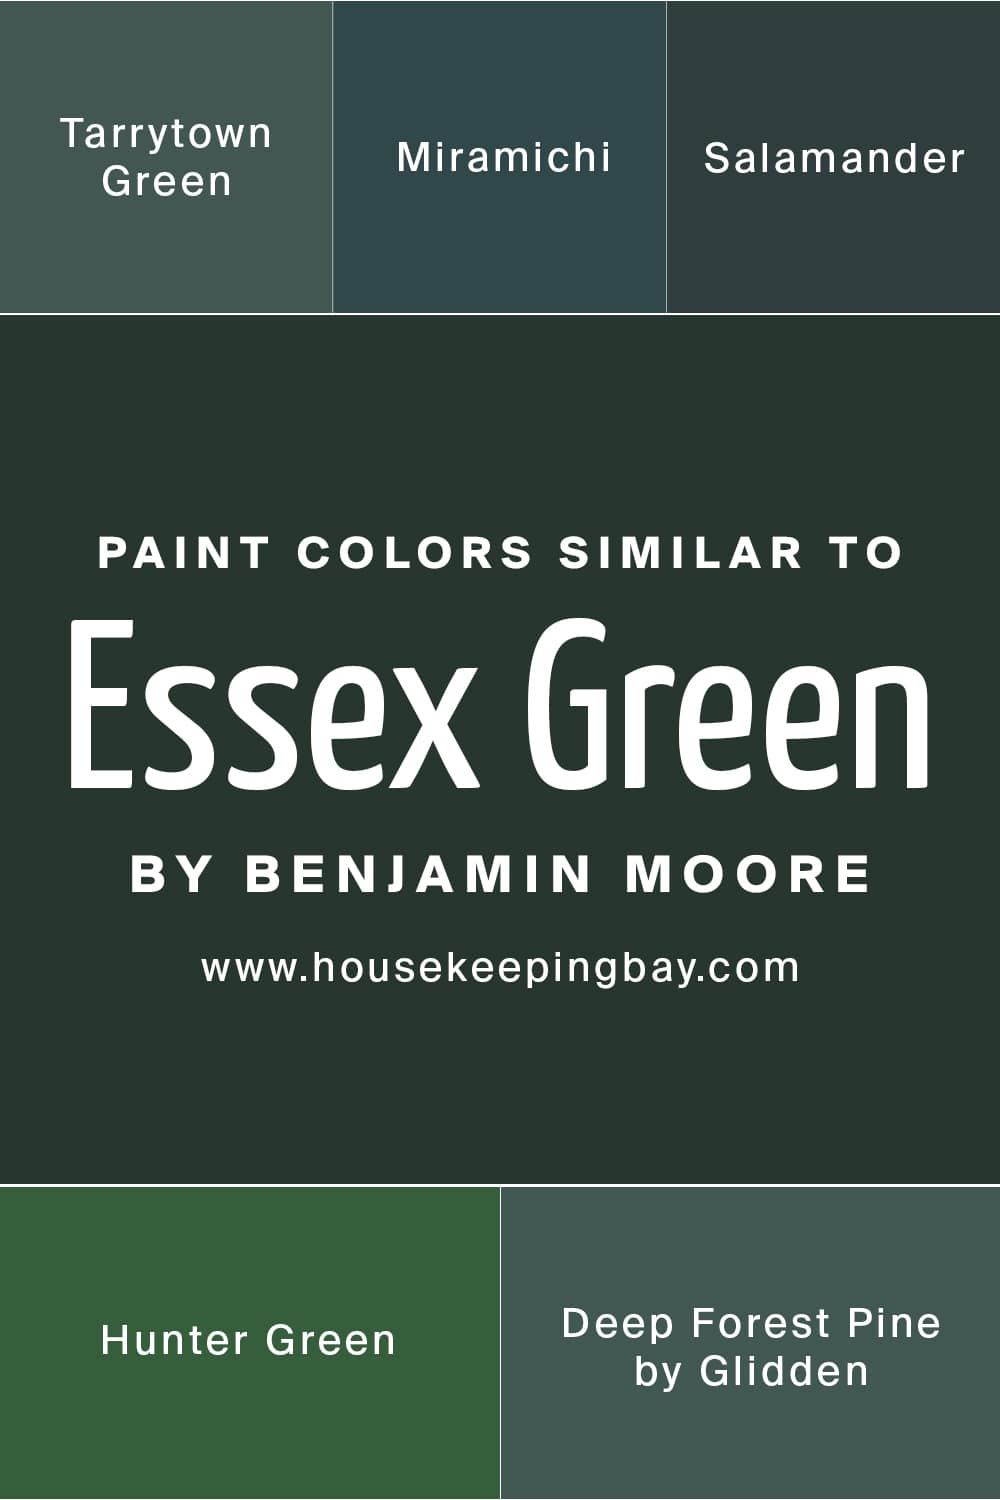 Paint Colors Similar to Essex Green by Benjamin Moore